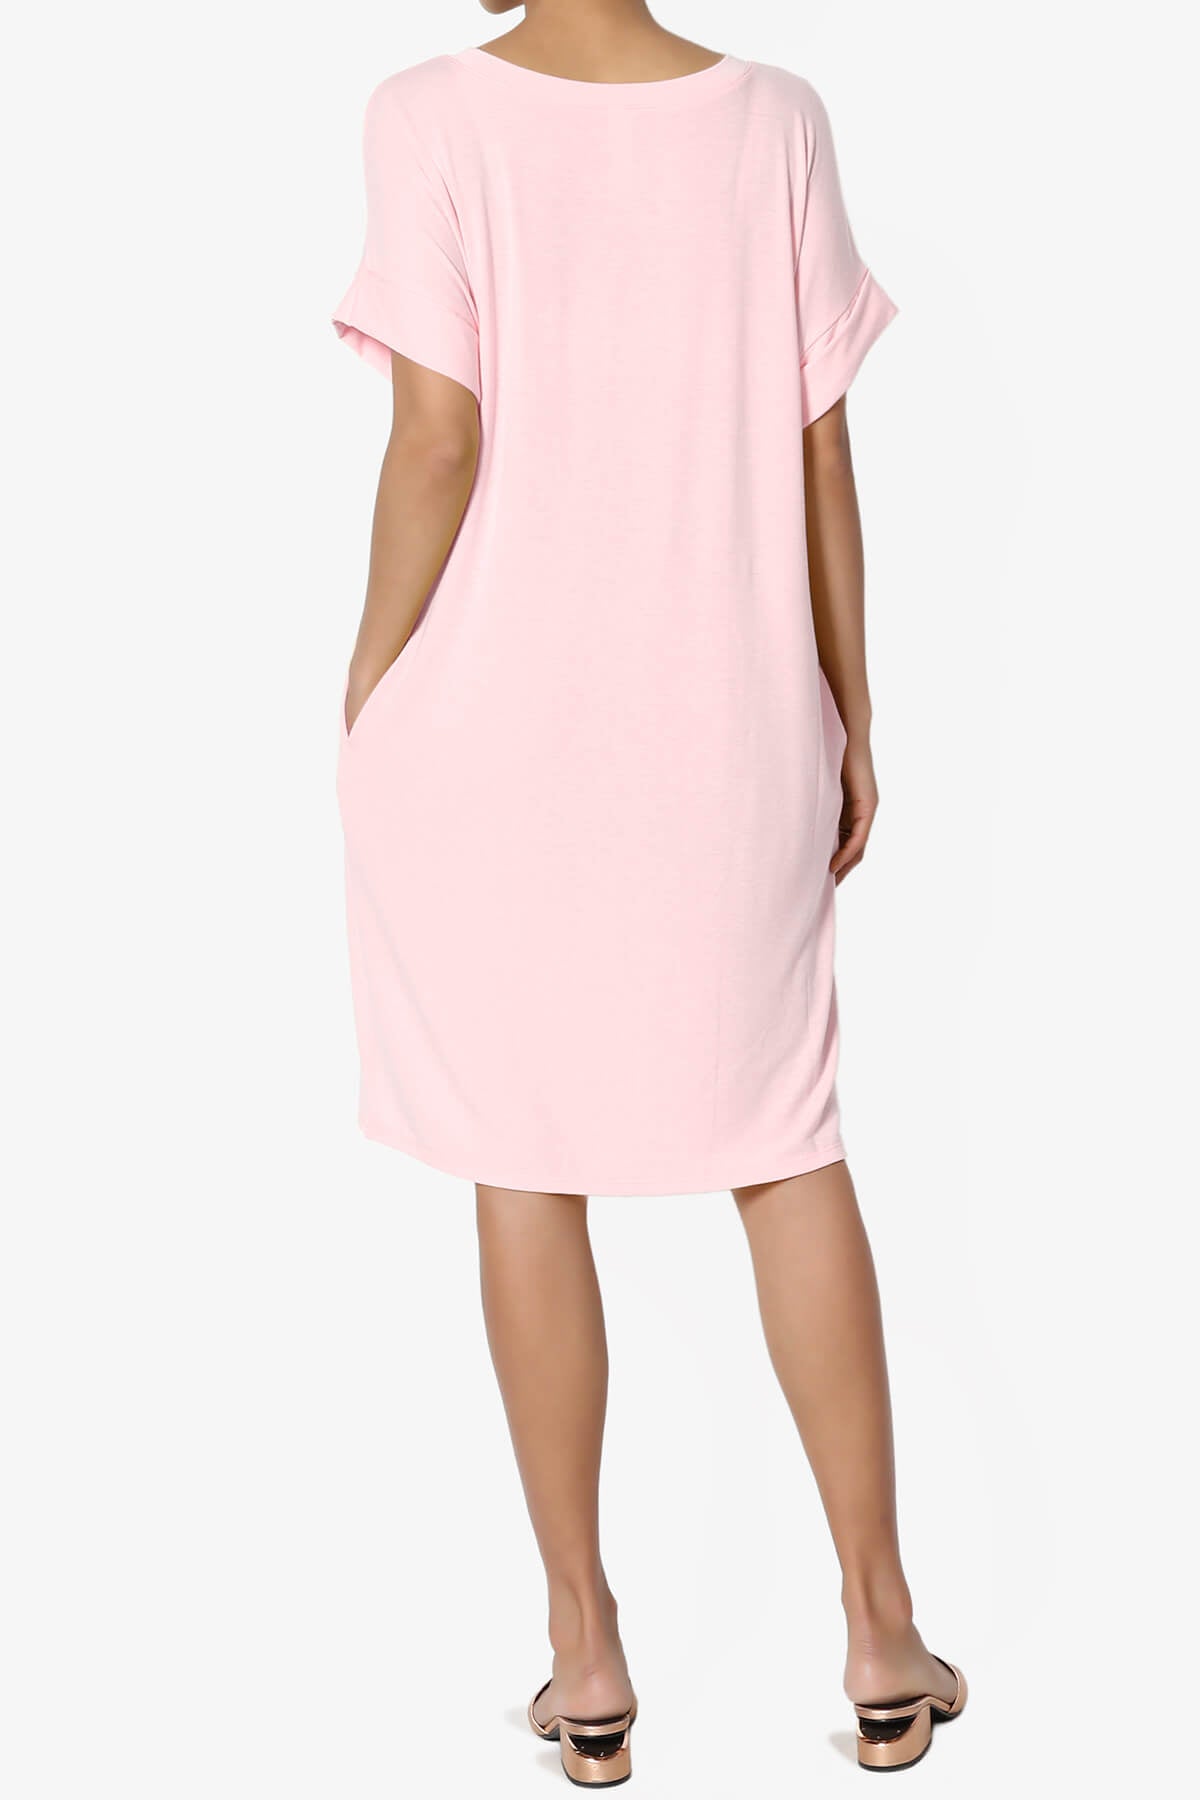 Load image into Gallery viewer, Janie Rolled Short Sleeve Round Neck Dress DUSTY PINK_2
